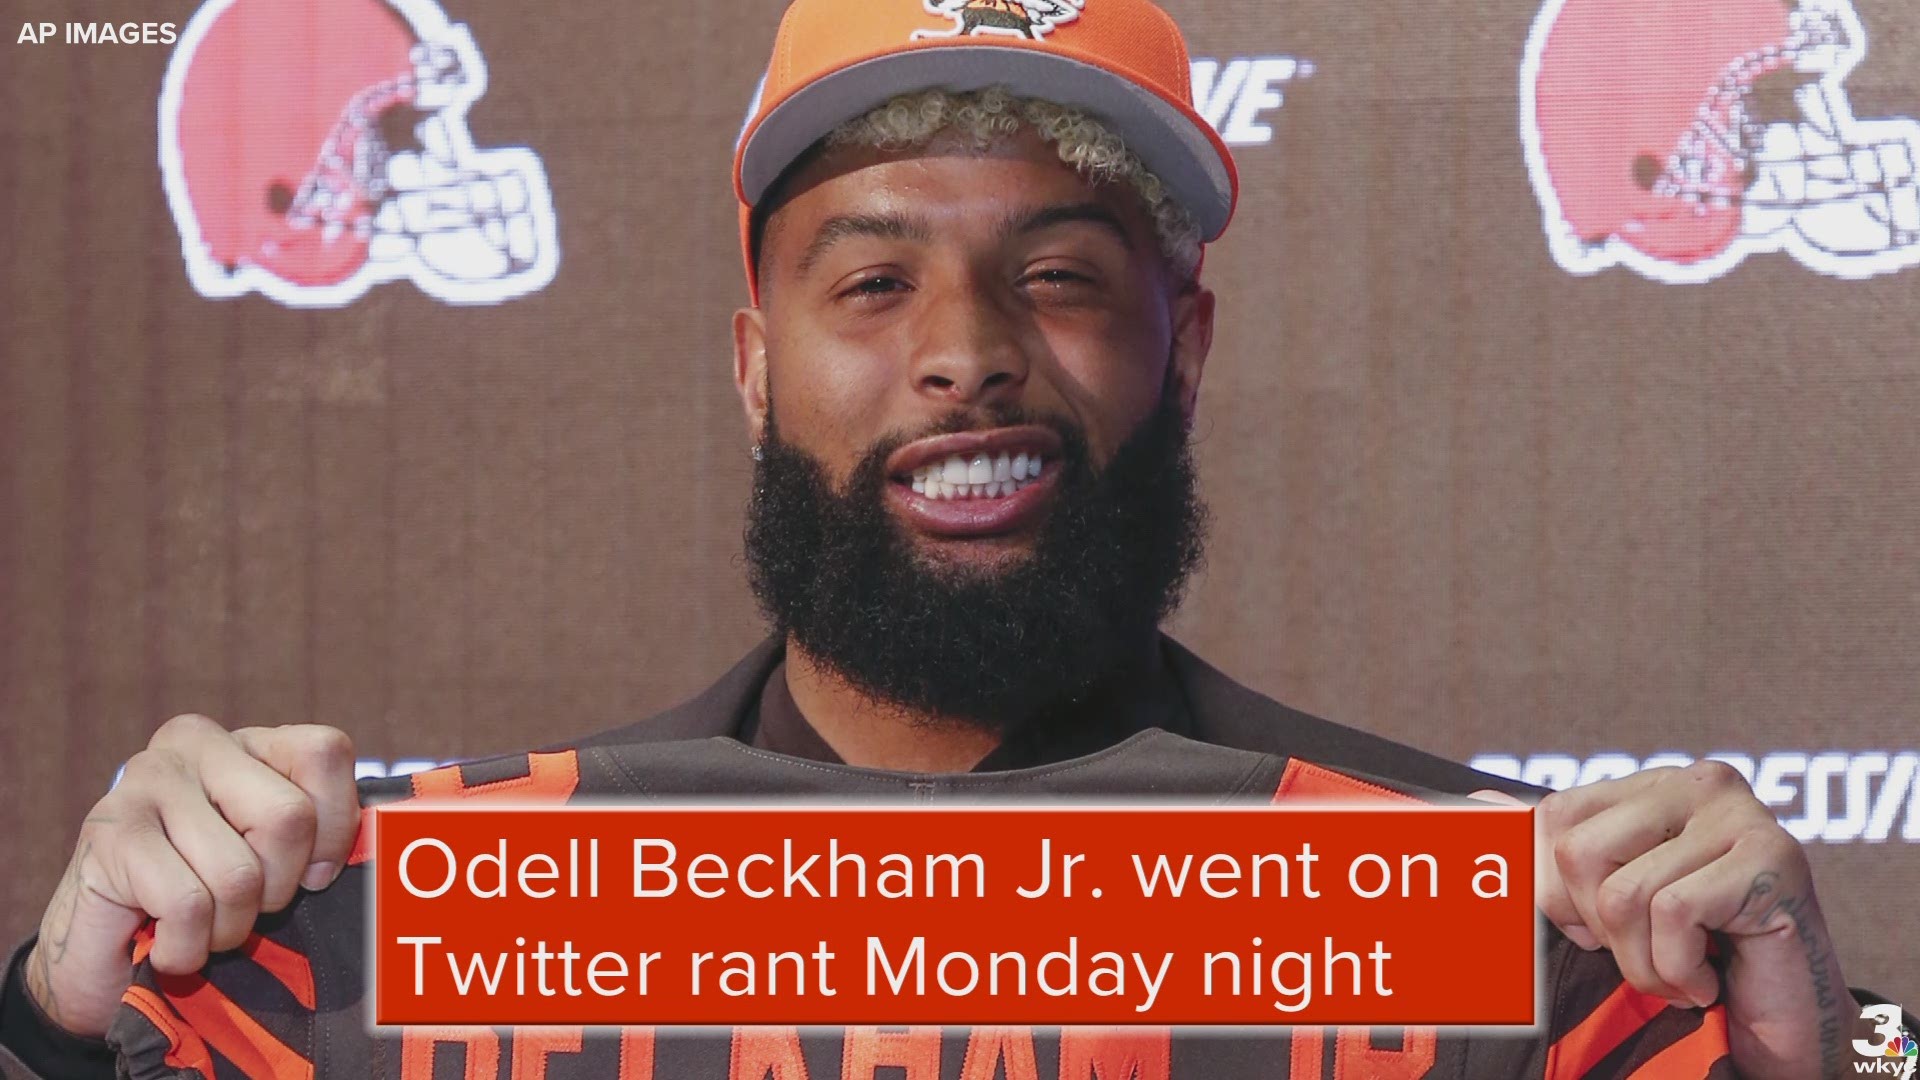 Cleveland Browns wide receiver Odell Beckham Jr. went on a Twitter rant in response to people questioning his commitment to the team while with the New York Giants.